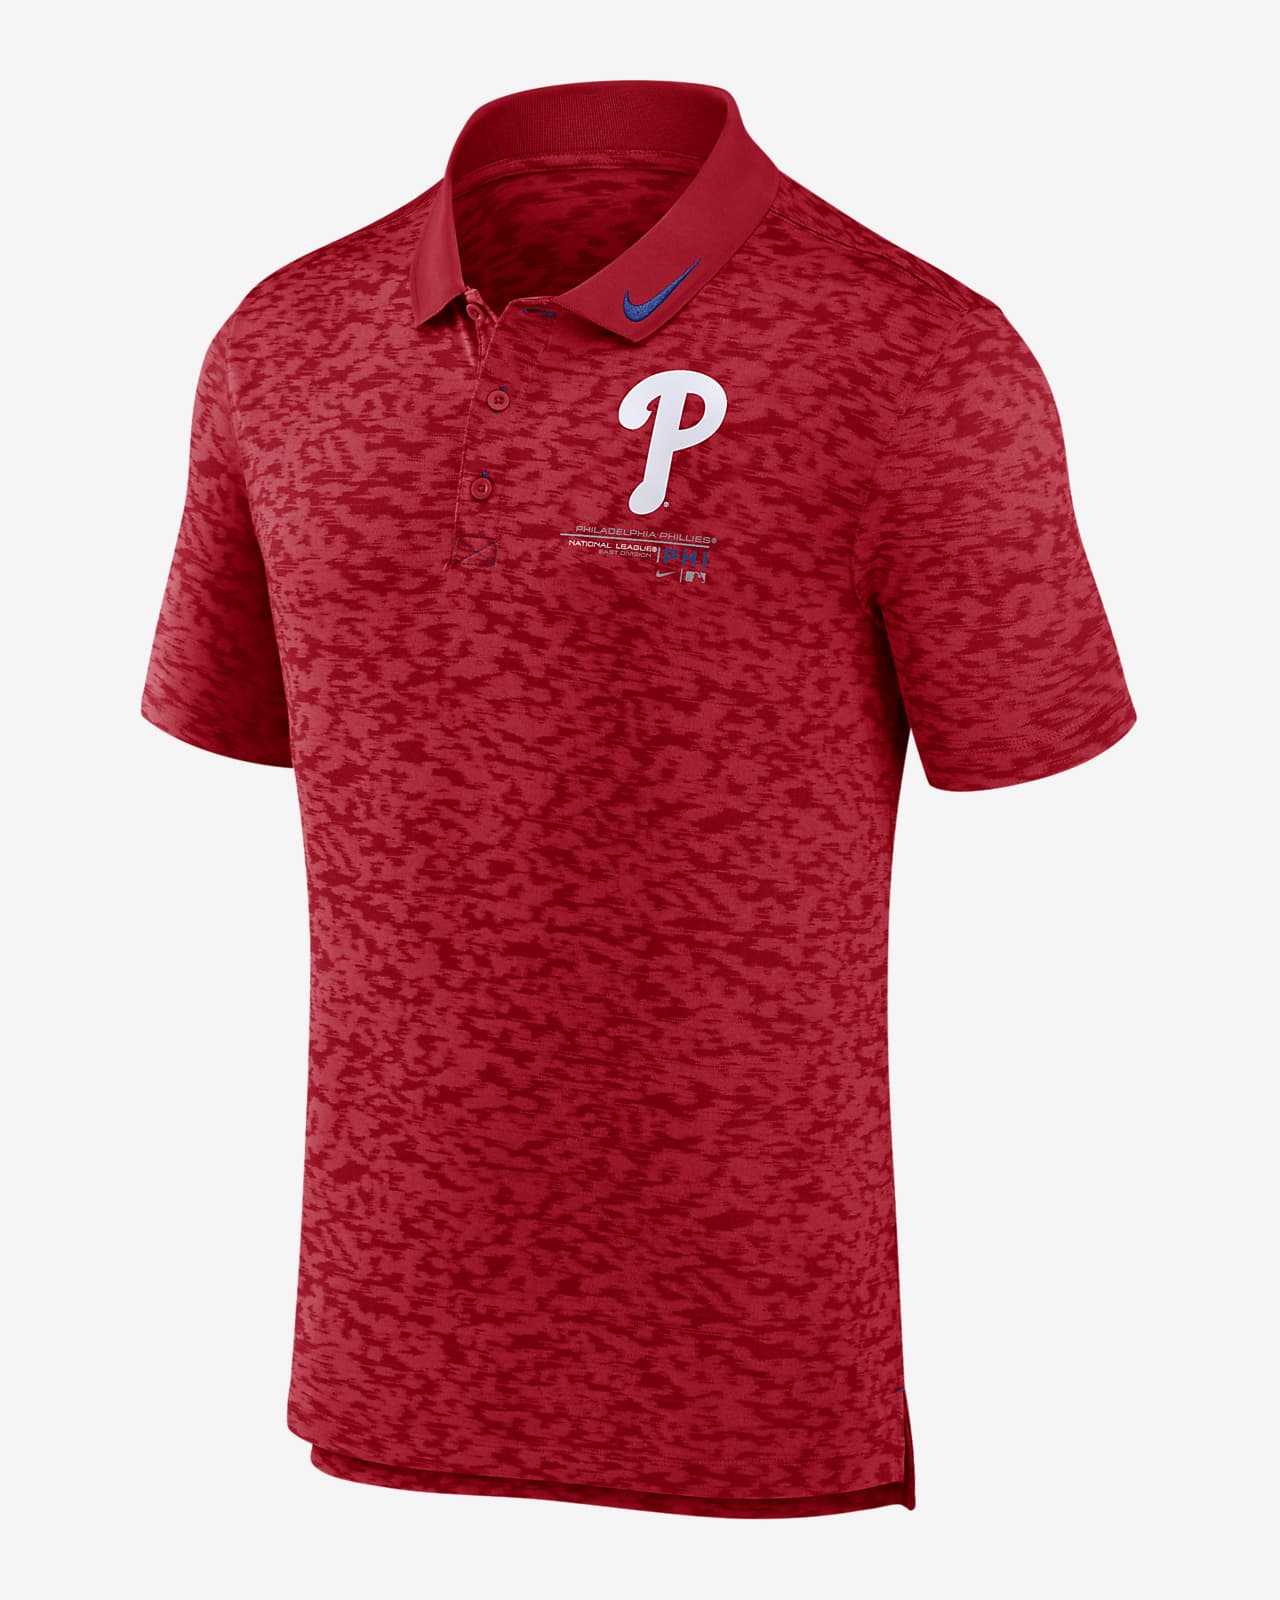 Nike next level. Braves Red Jersey.